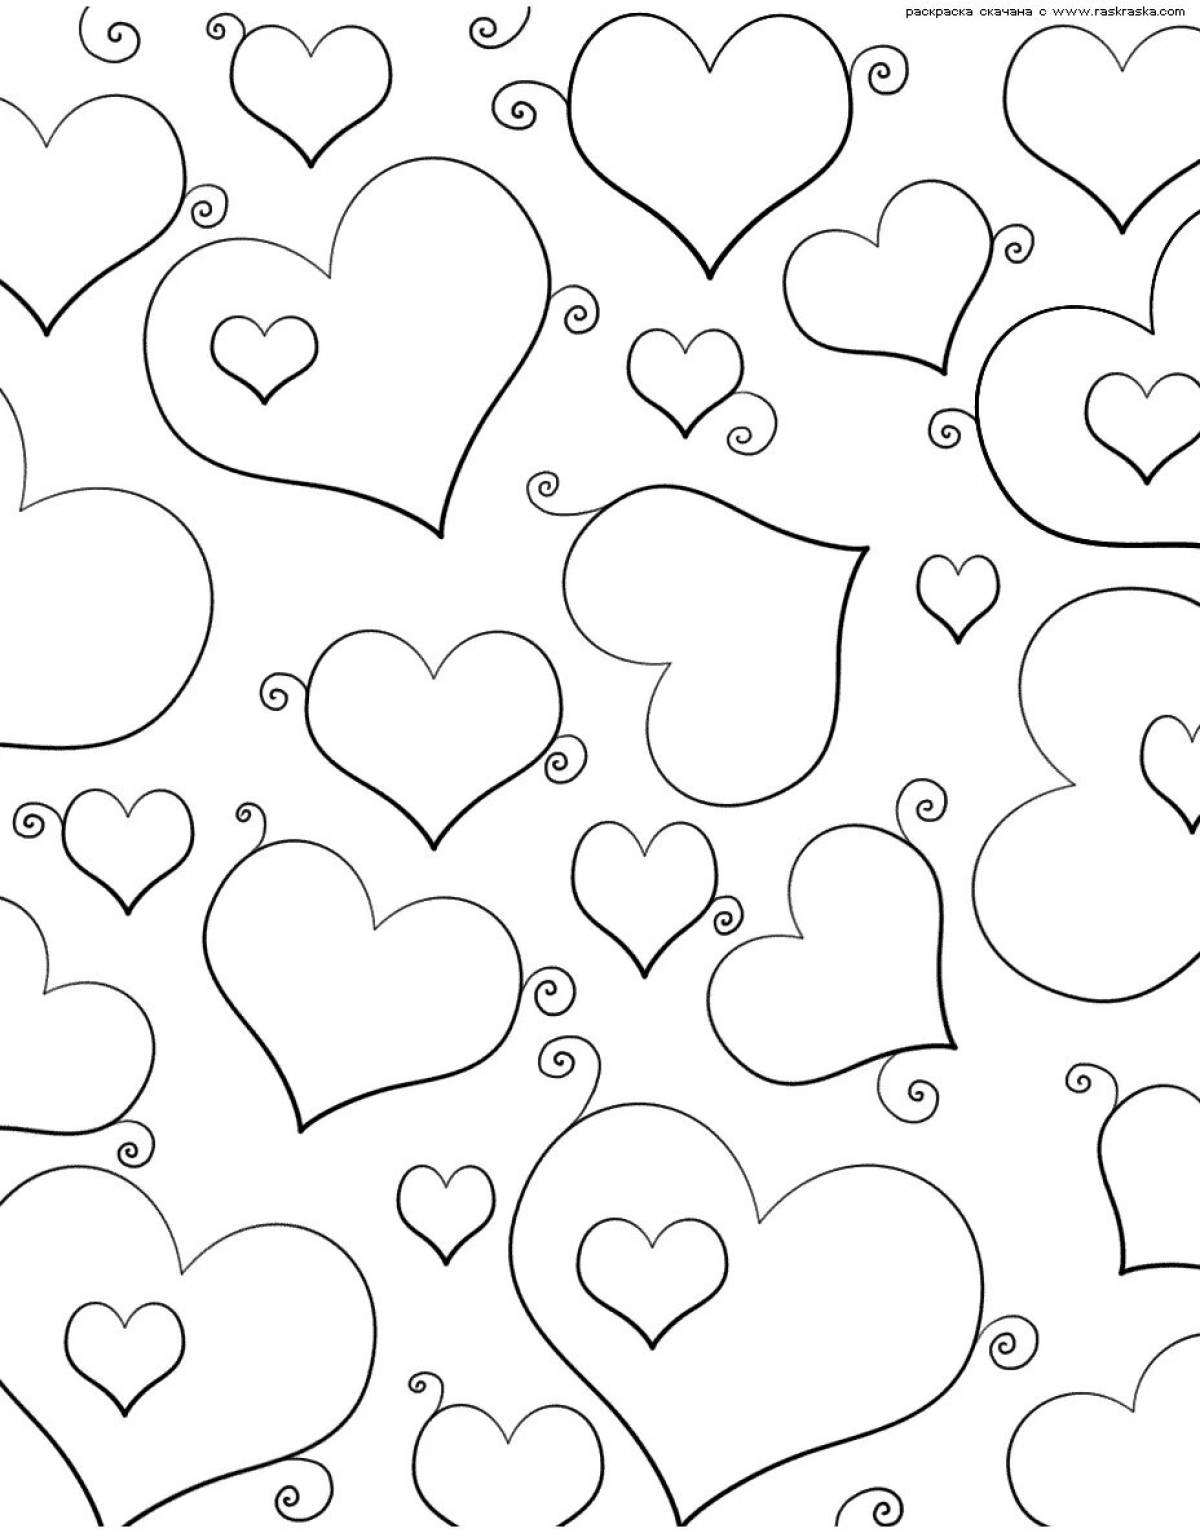 Color-vibrant heart lot coloring page